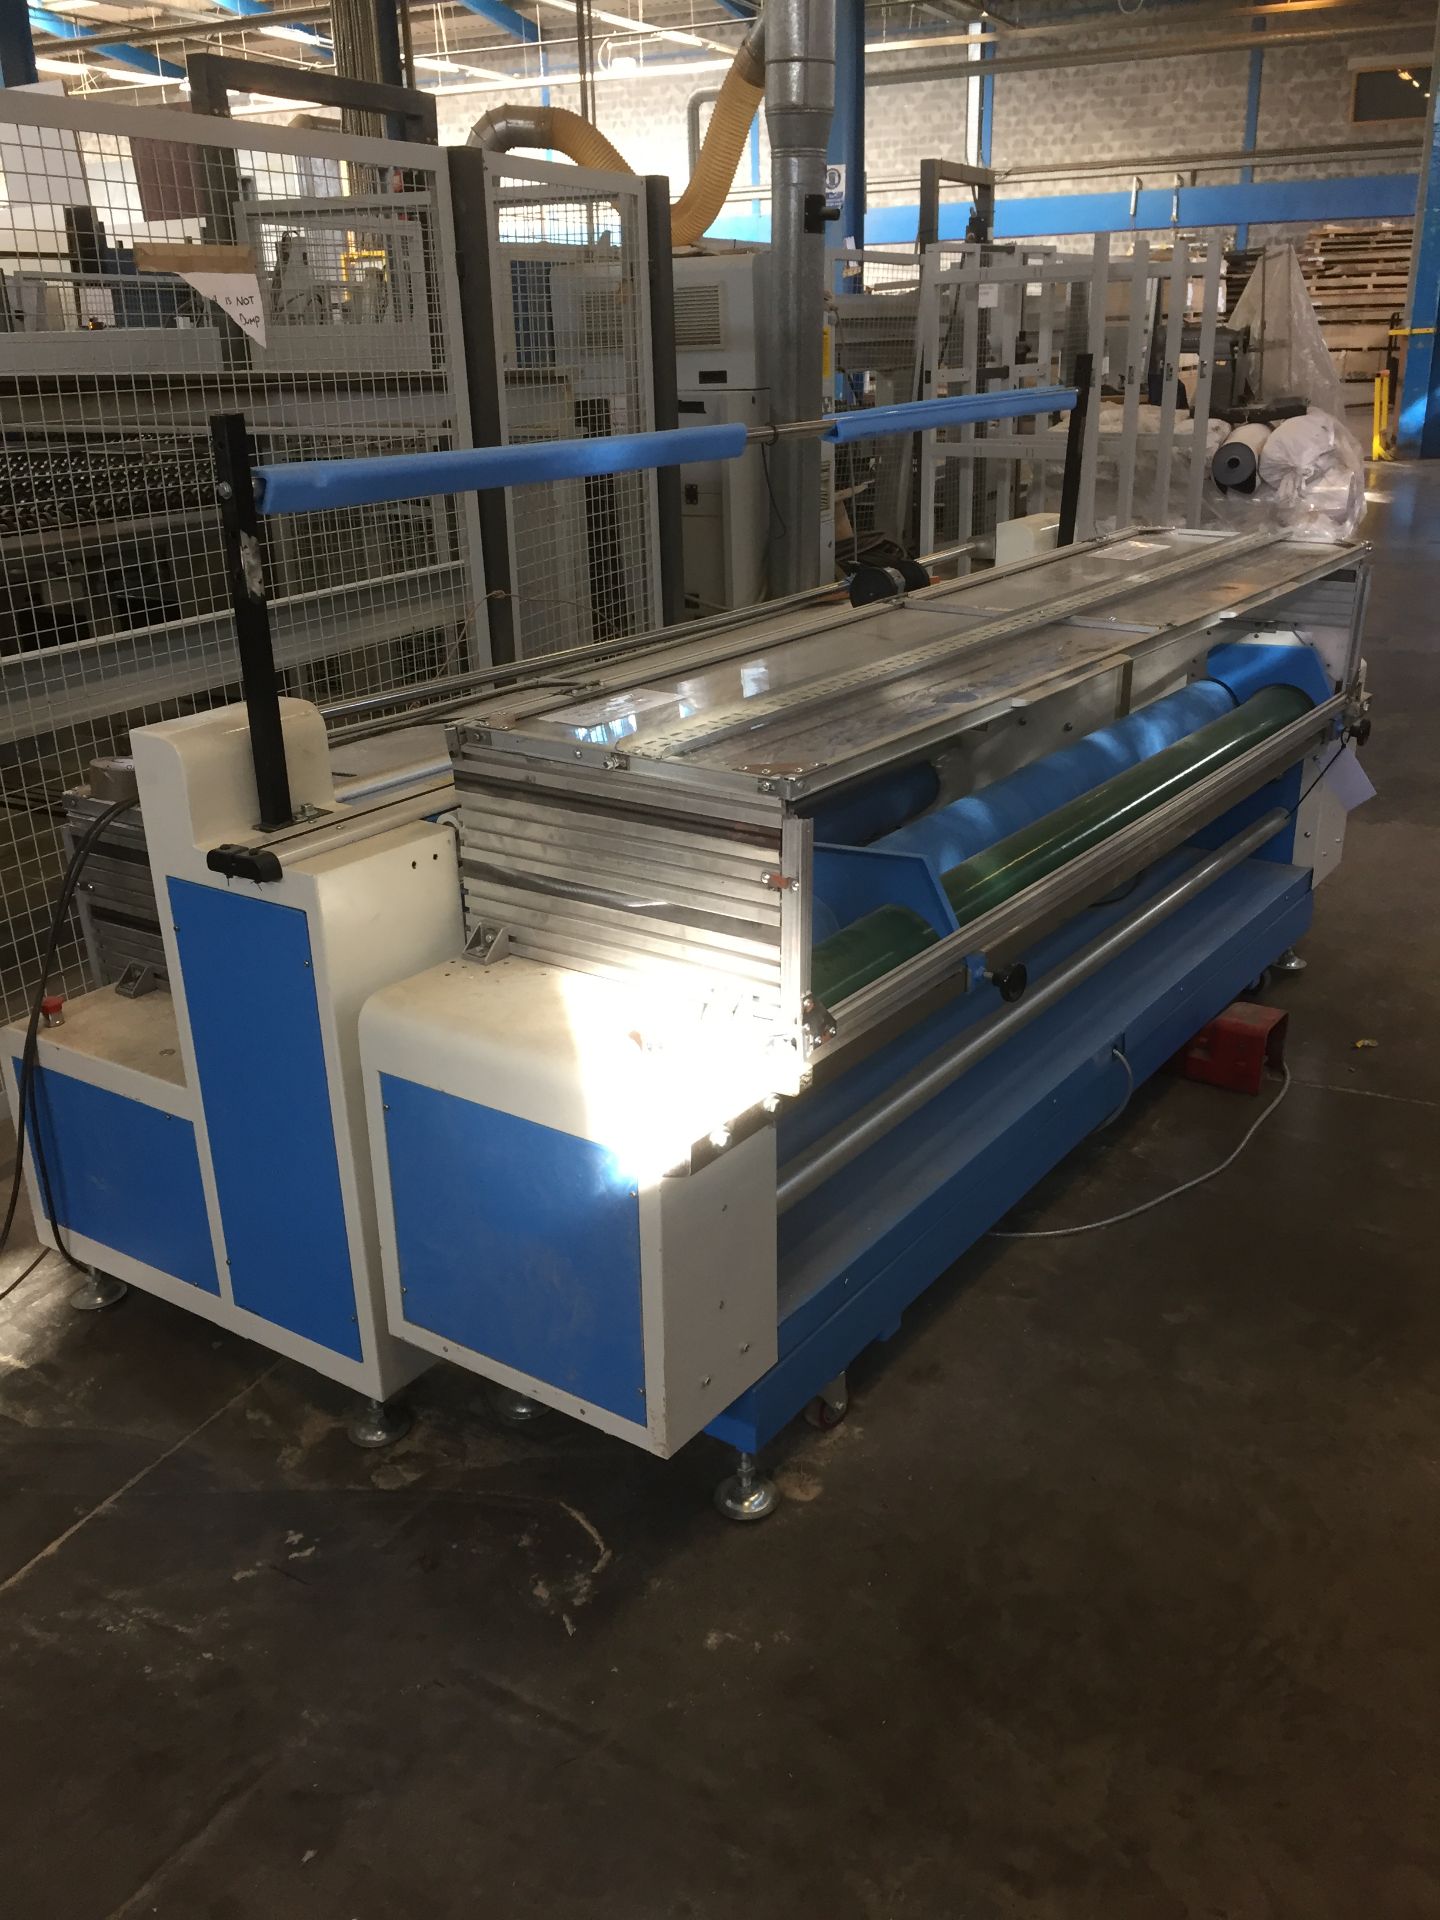 JD Automatic rolling fabric machine (240v) Model No. YFD-2100 F11(2019) Capacity 2100mm ** This - Image 2 of 3